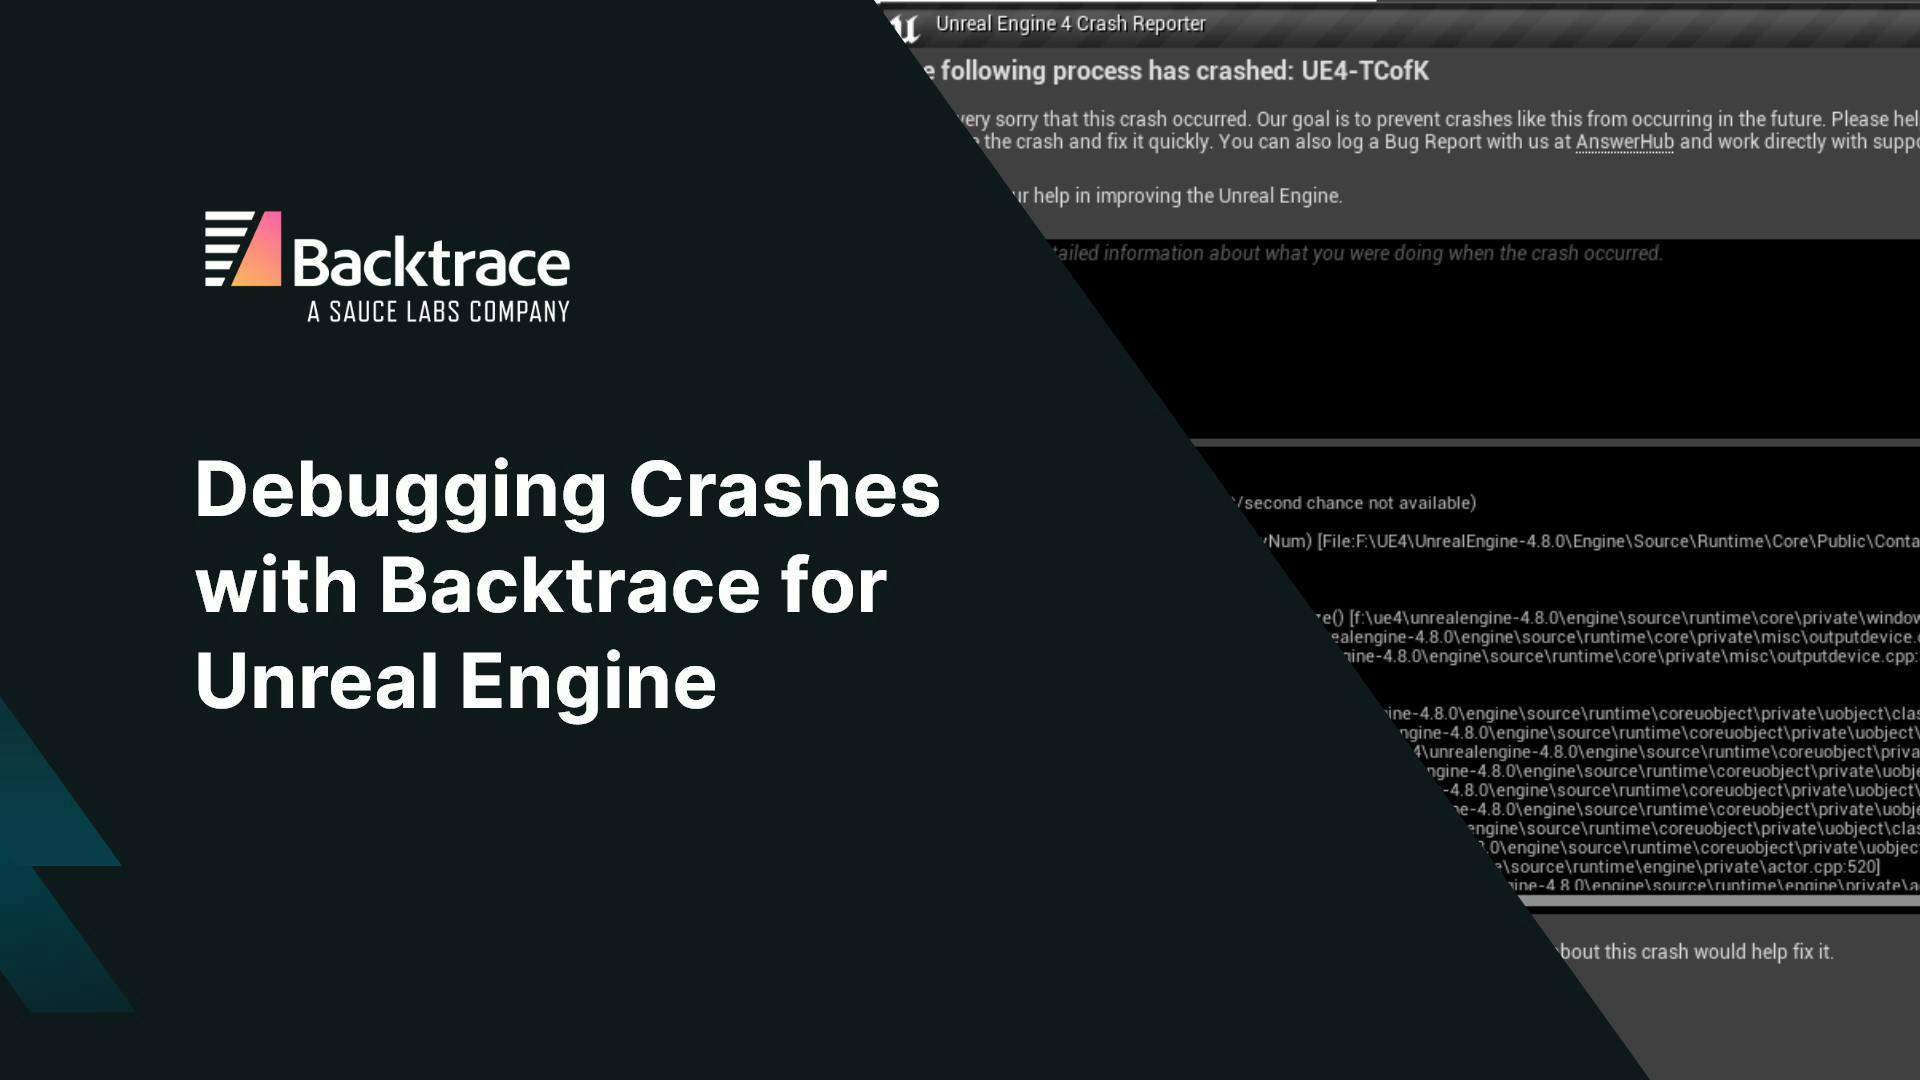 Webinar Series: DEBUGGING CRASHES WITH BACKTRACE FOR UNREAL ENGINE